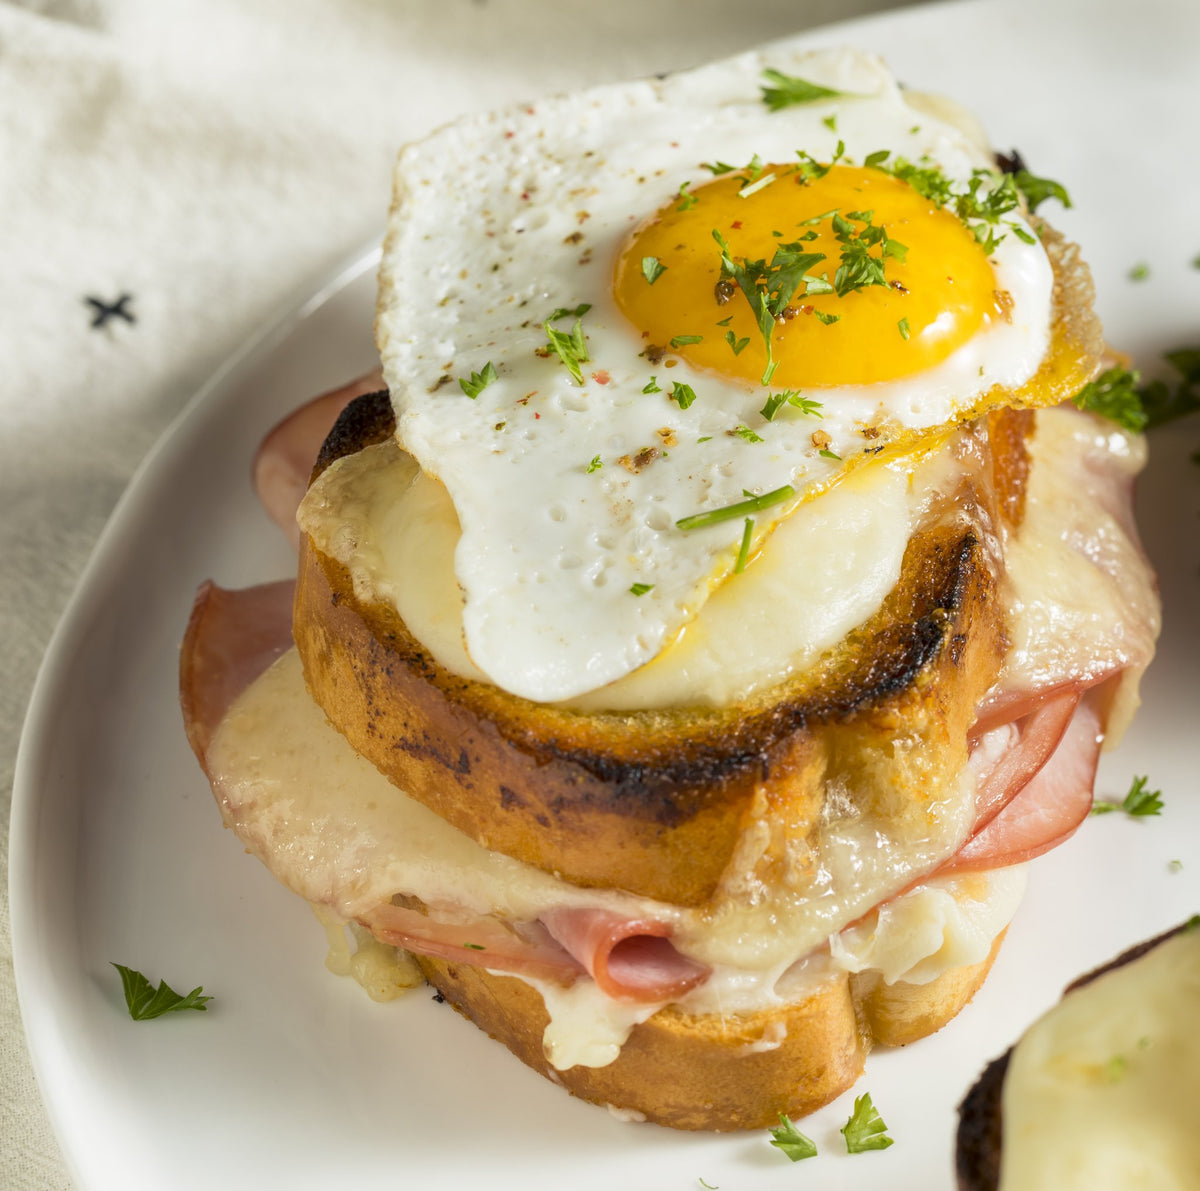 Croque Madame Assembly Instructions